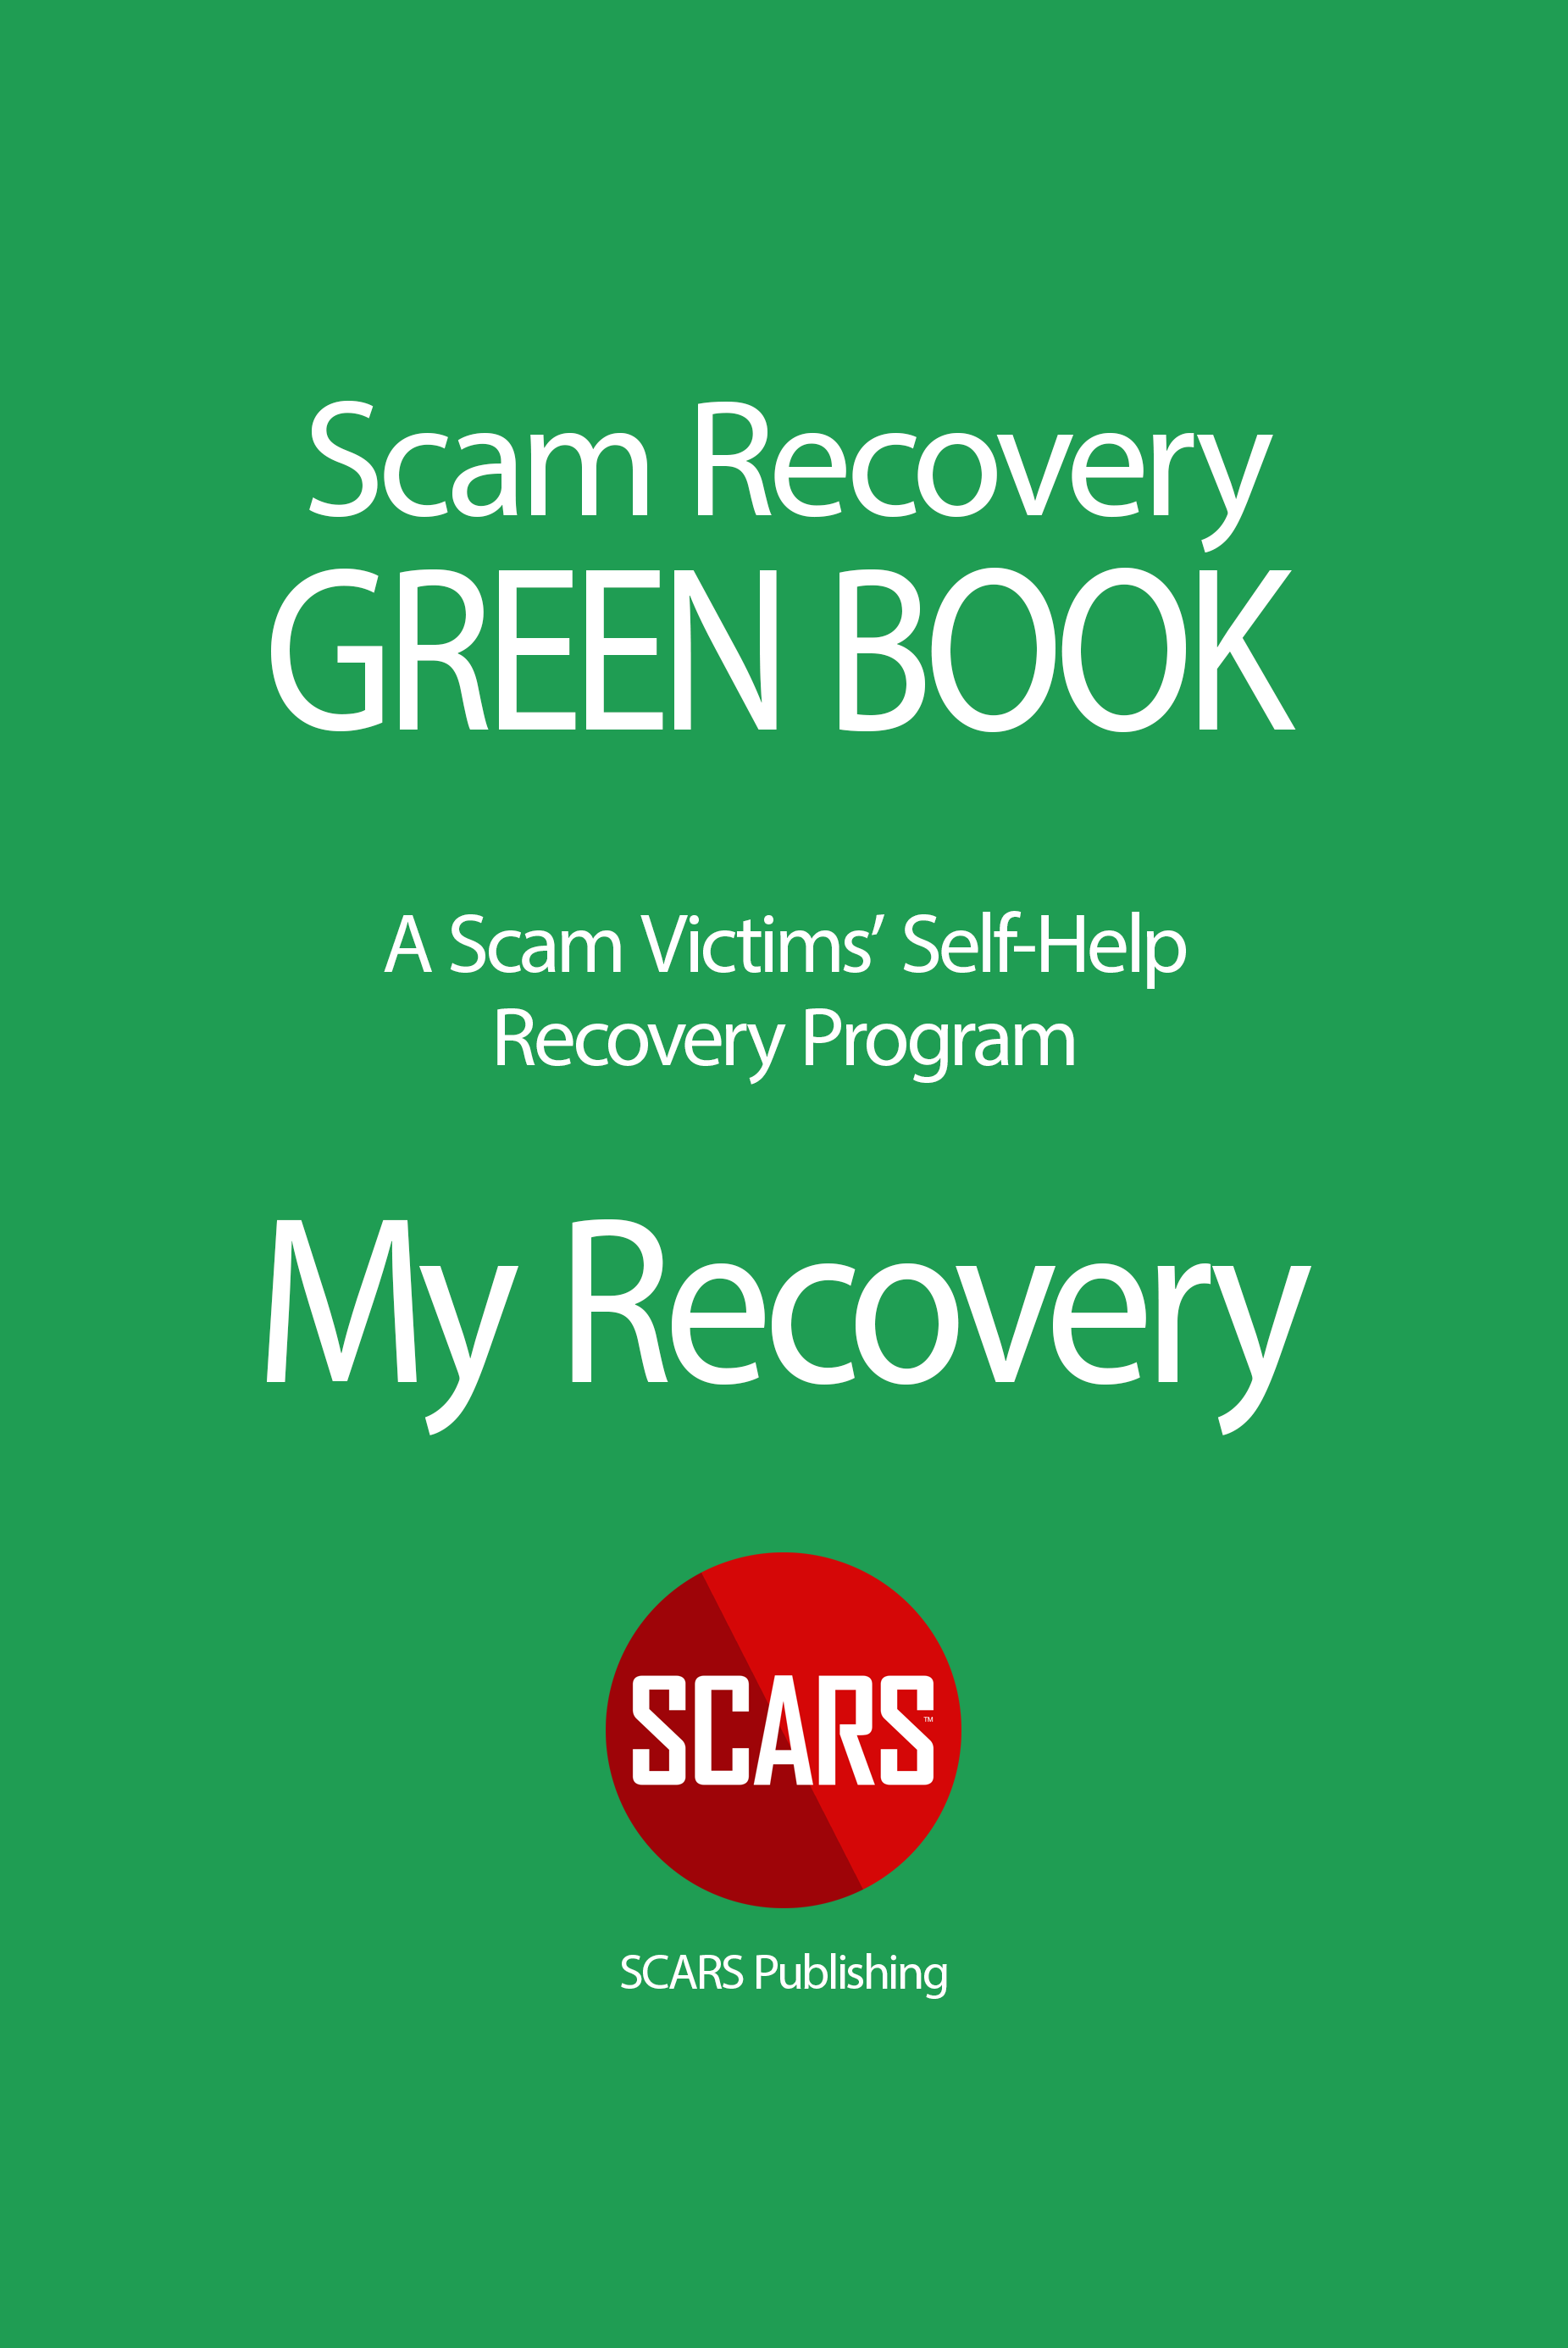 SCARS GREEN BOOK - Recovering from the Scam - from SCARS Publishing shop.AgainstScams.org